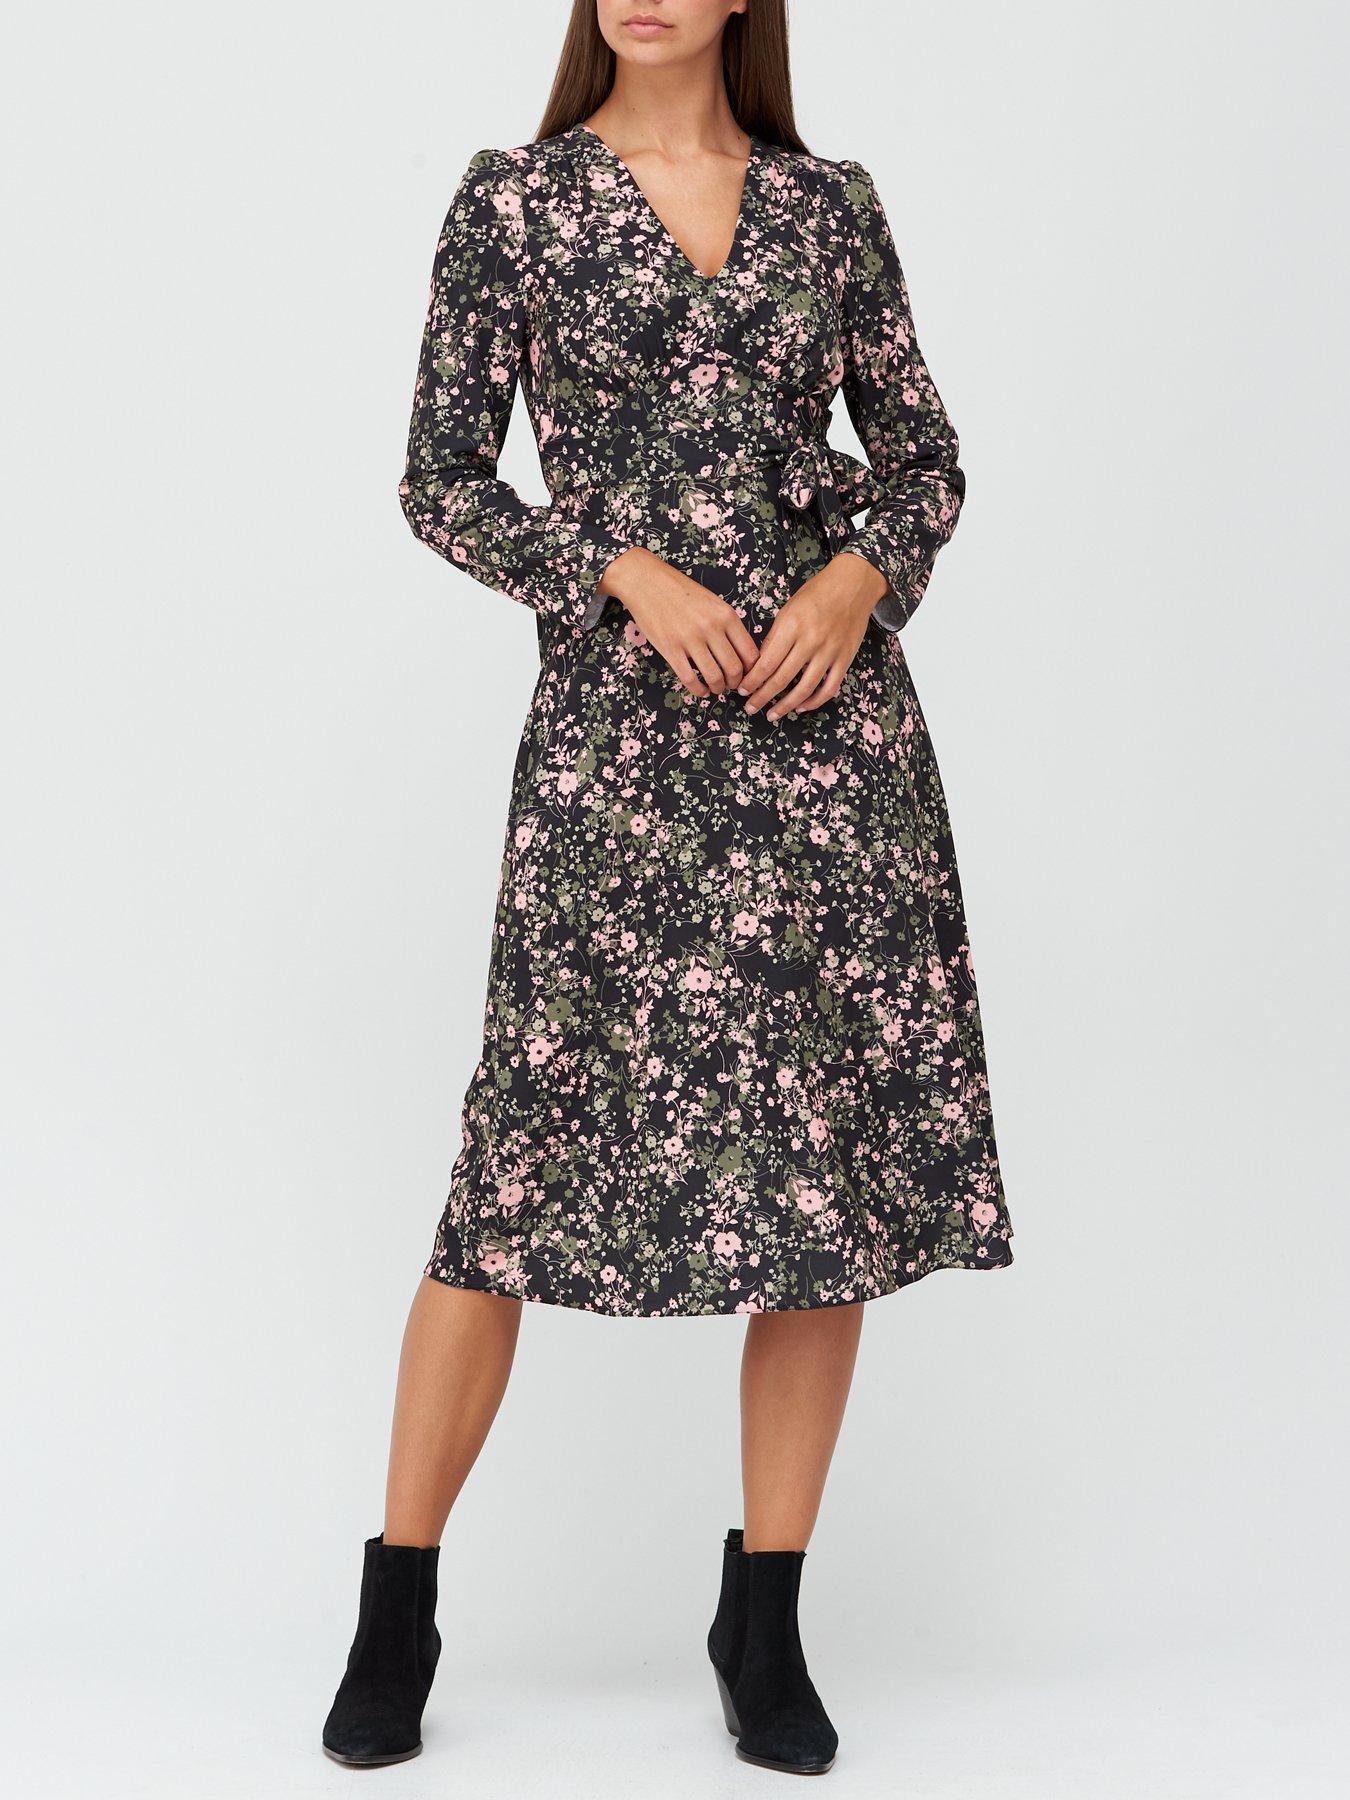 floral tea dresses with sleeves